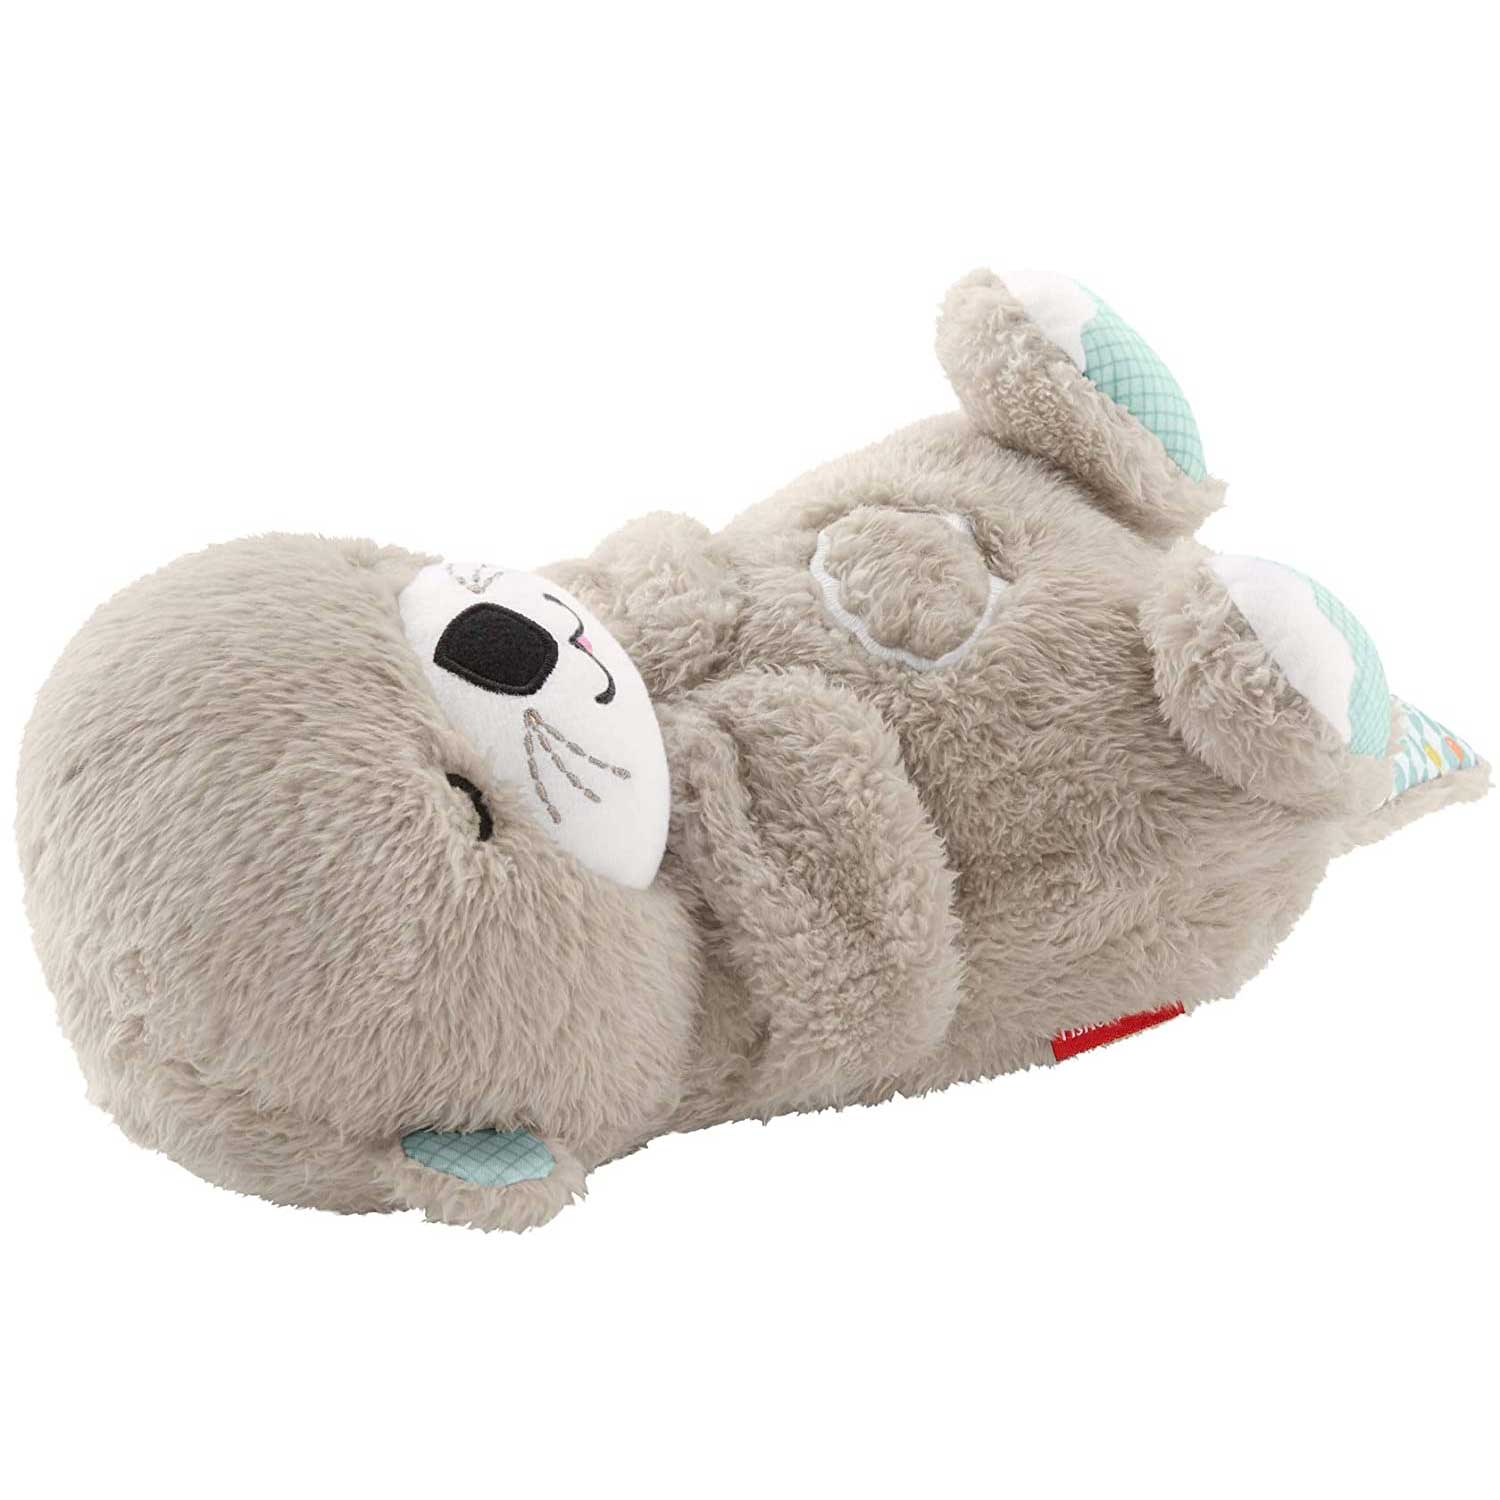 Fisher-Price Soothe 'n Snuggle Otter, Portable Plush Soother with Music, Sounds, Lights and Breathing Motion - Mod: FXC66